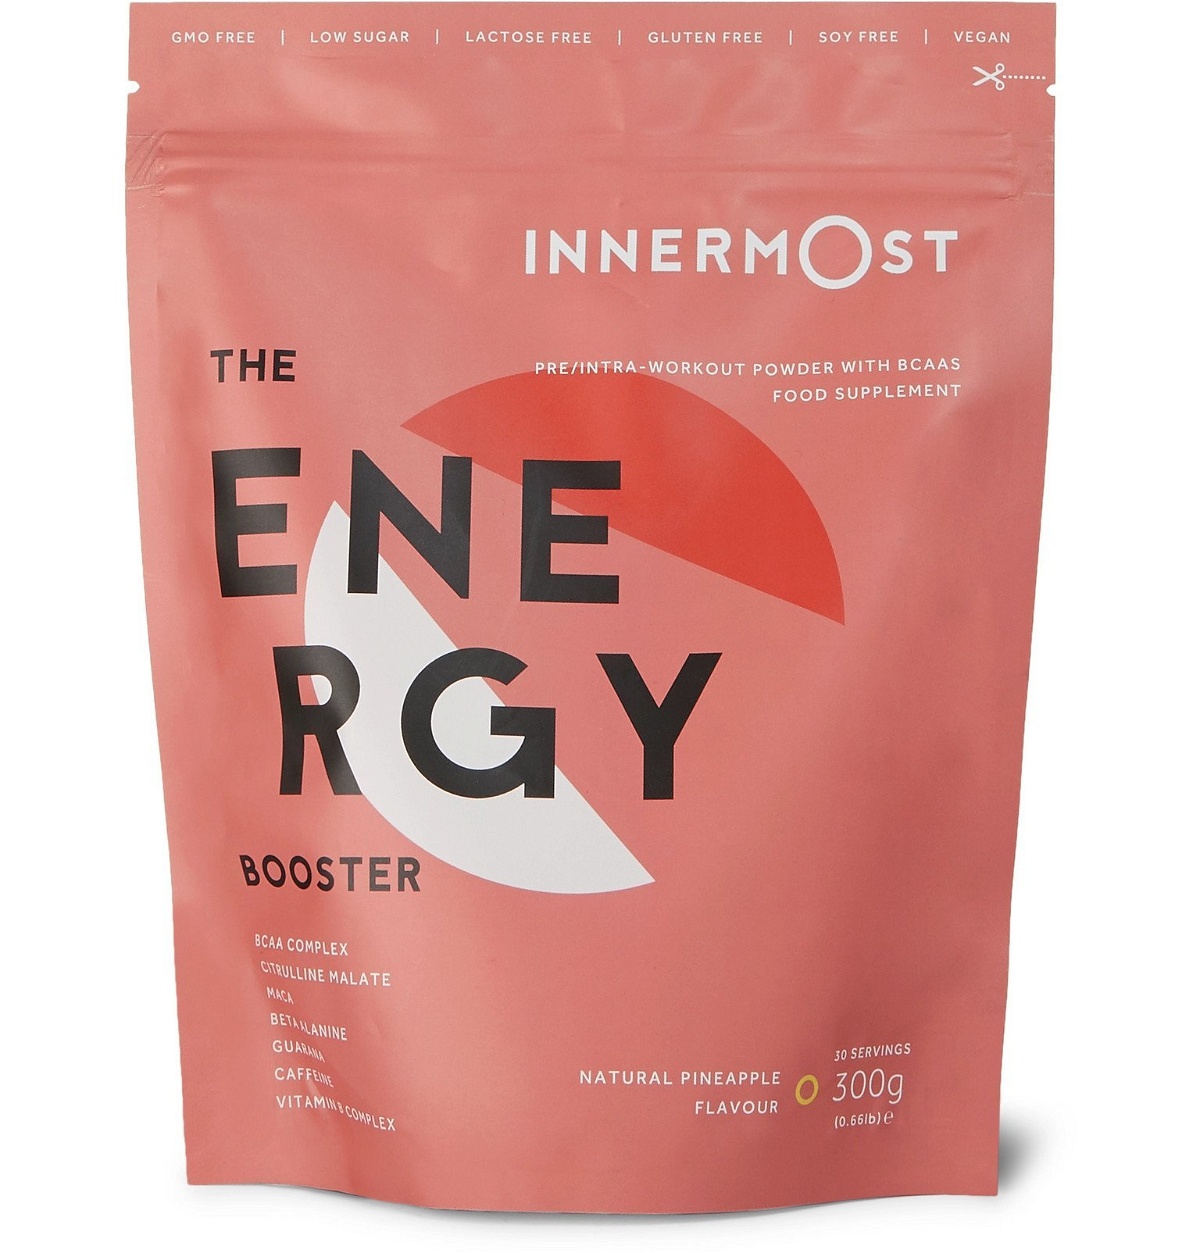 Photo: Innermost - The Energy Booster - Pineapple. 300g - Colorless